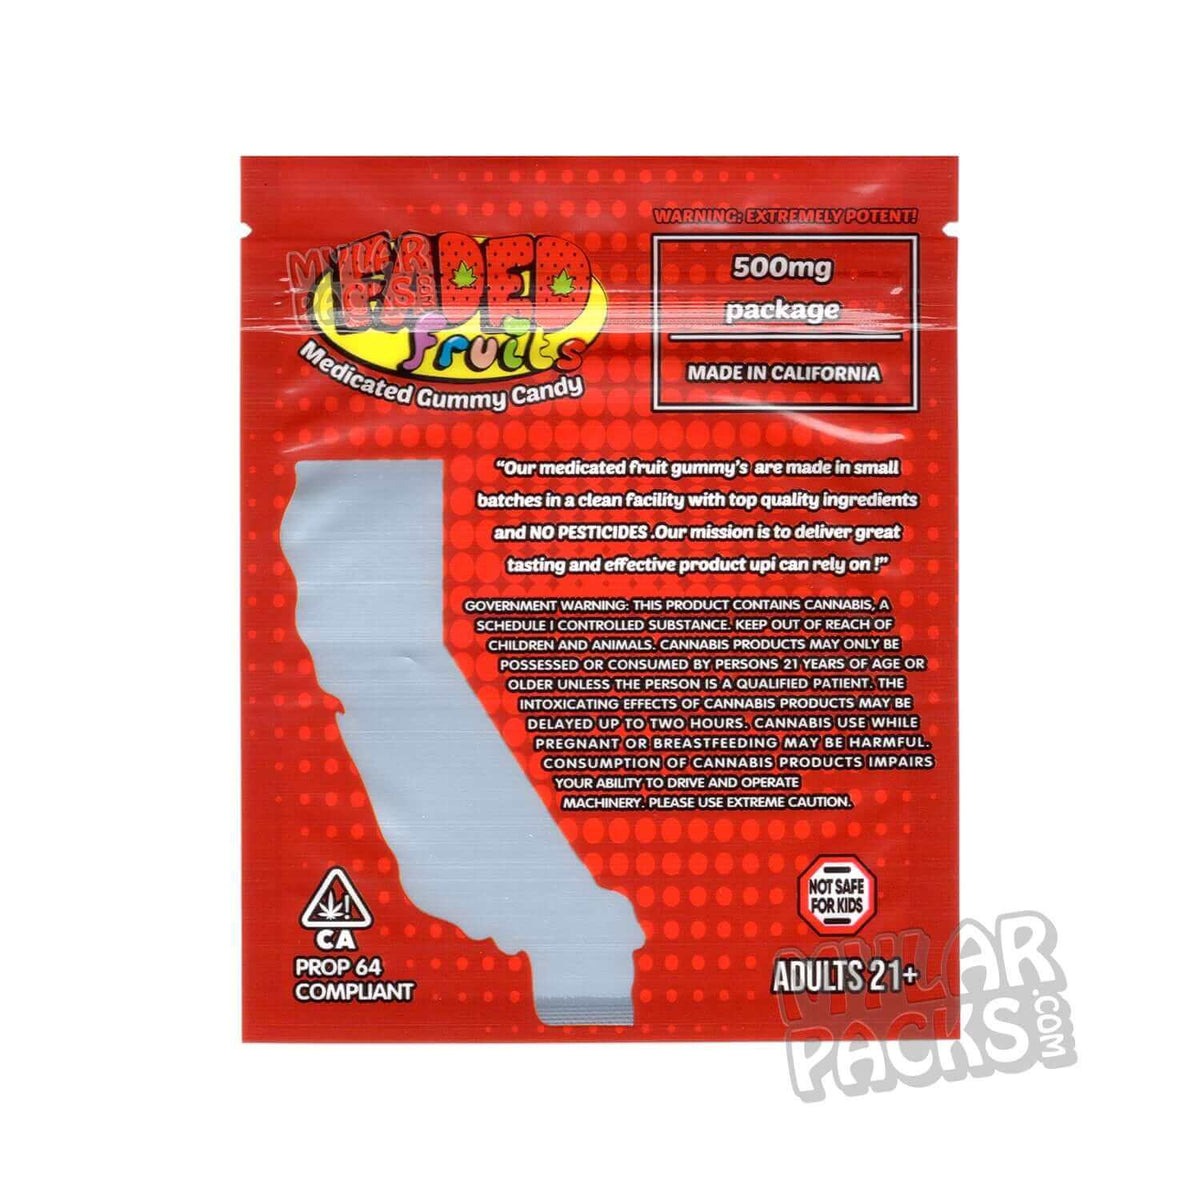 Faded Fruits Strawberry Cough 500mg Empty Edibles Mylar Packaging Bags Mylar Master 3385